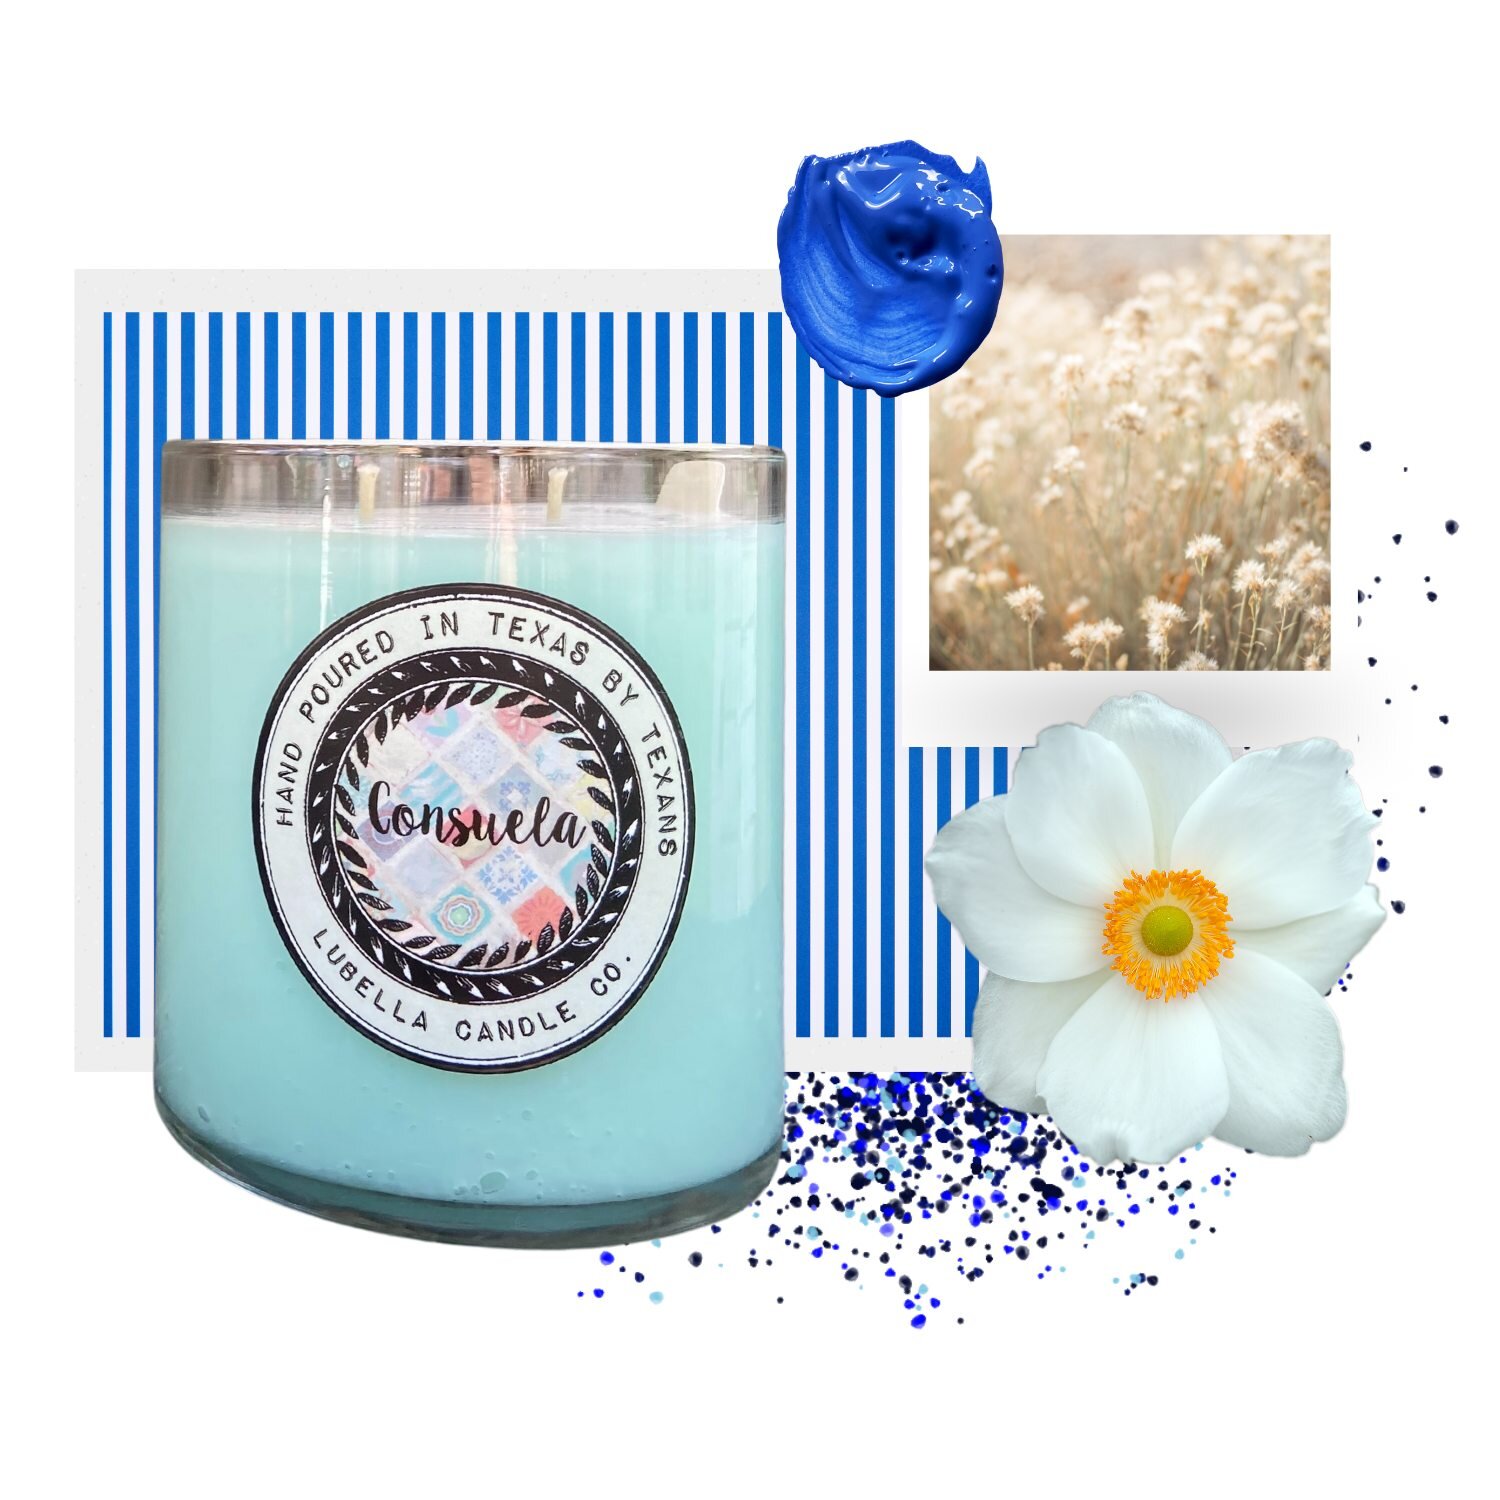 Lubella candles make the perfect gift for yourself and others! Treat yourself to some self-care, or surprise a loved one with a handcrafted candle. With our longlasting scents Lubella candles are sure to delight anyone. #LubellaCandles #SelfCare #Gif